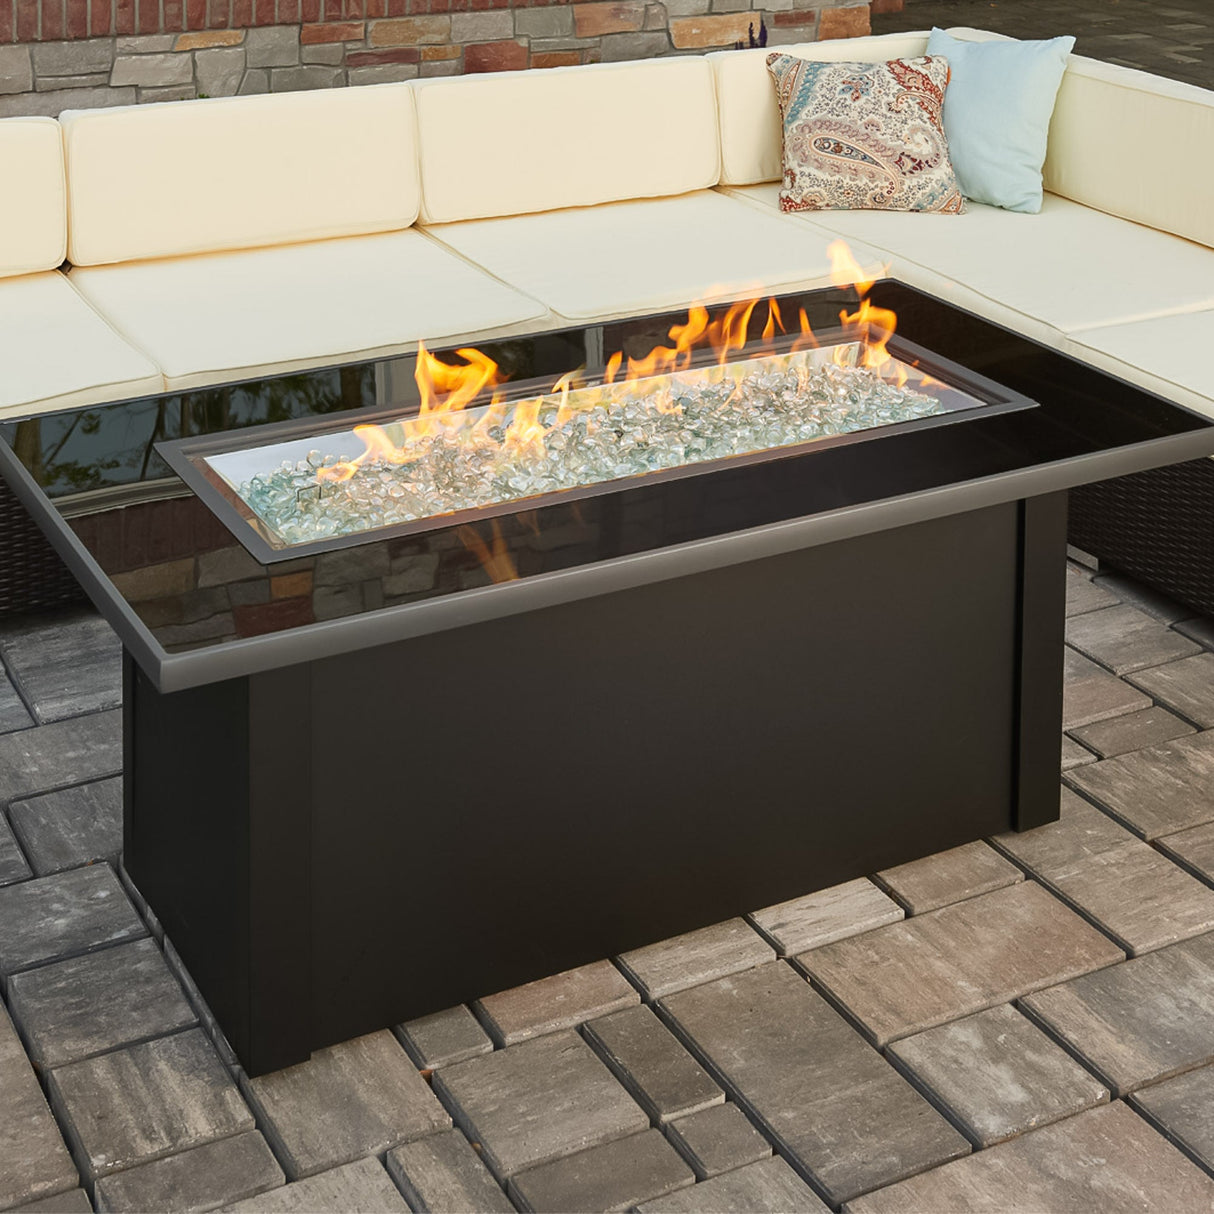 The Monte Carlo Linear Gas Fire Pit Table placed around an outdoor couch on a patio setting